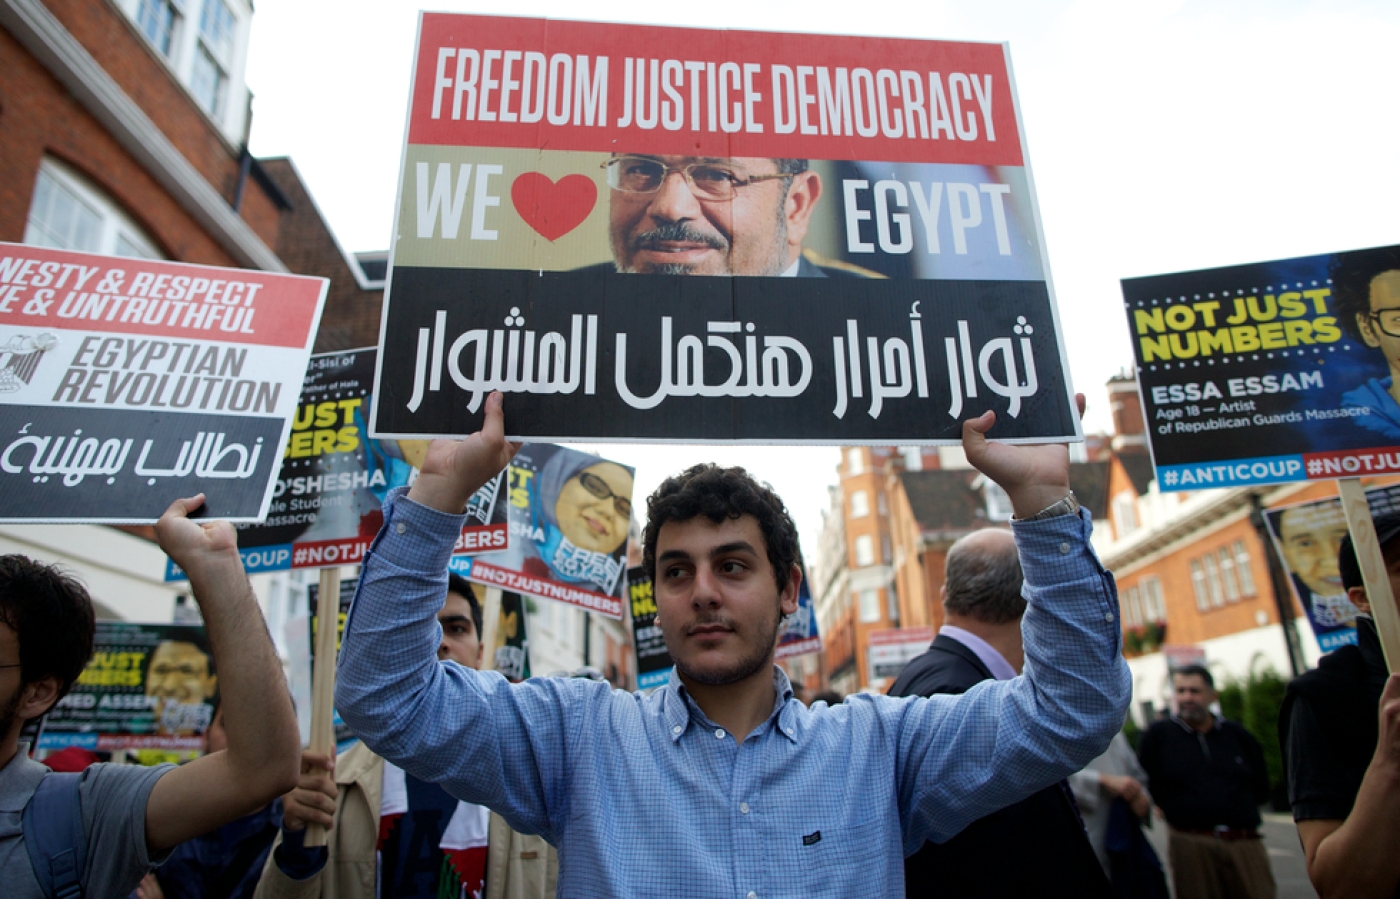 UK rules out banning Muslim Brotherhood | Middle East Eye édition française